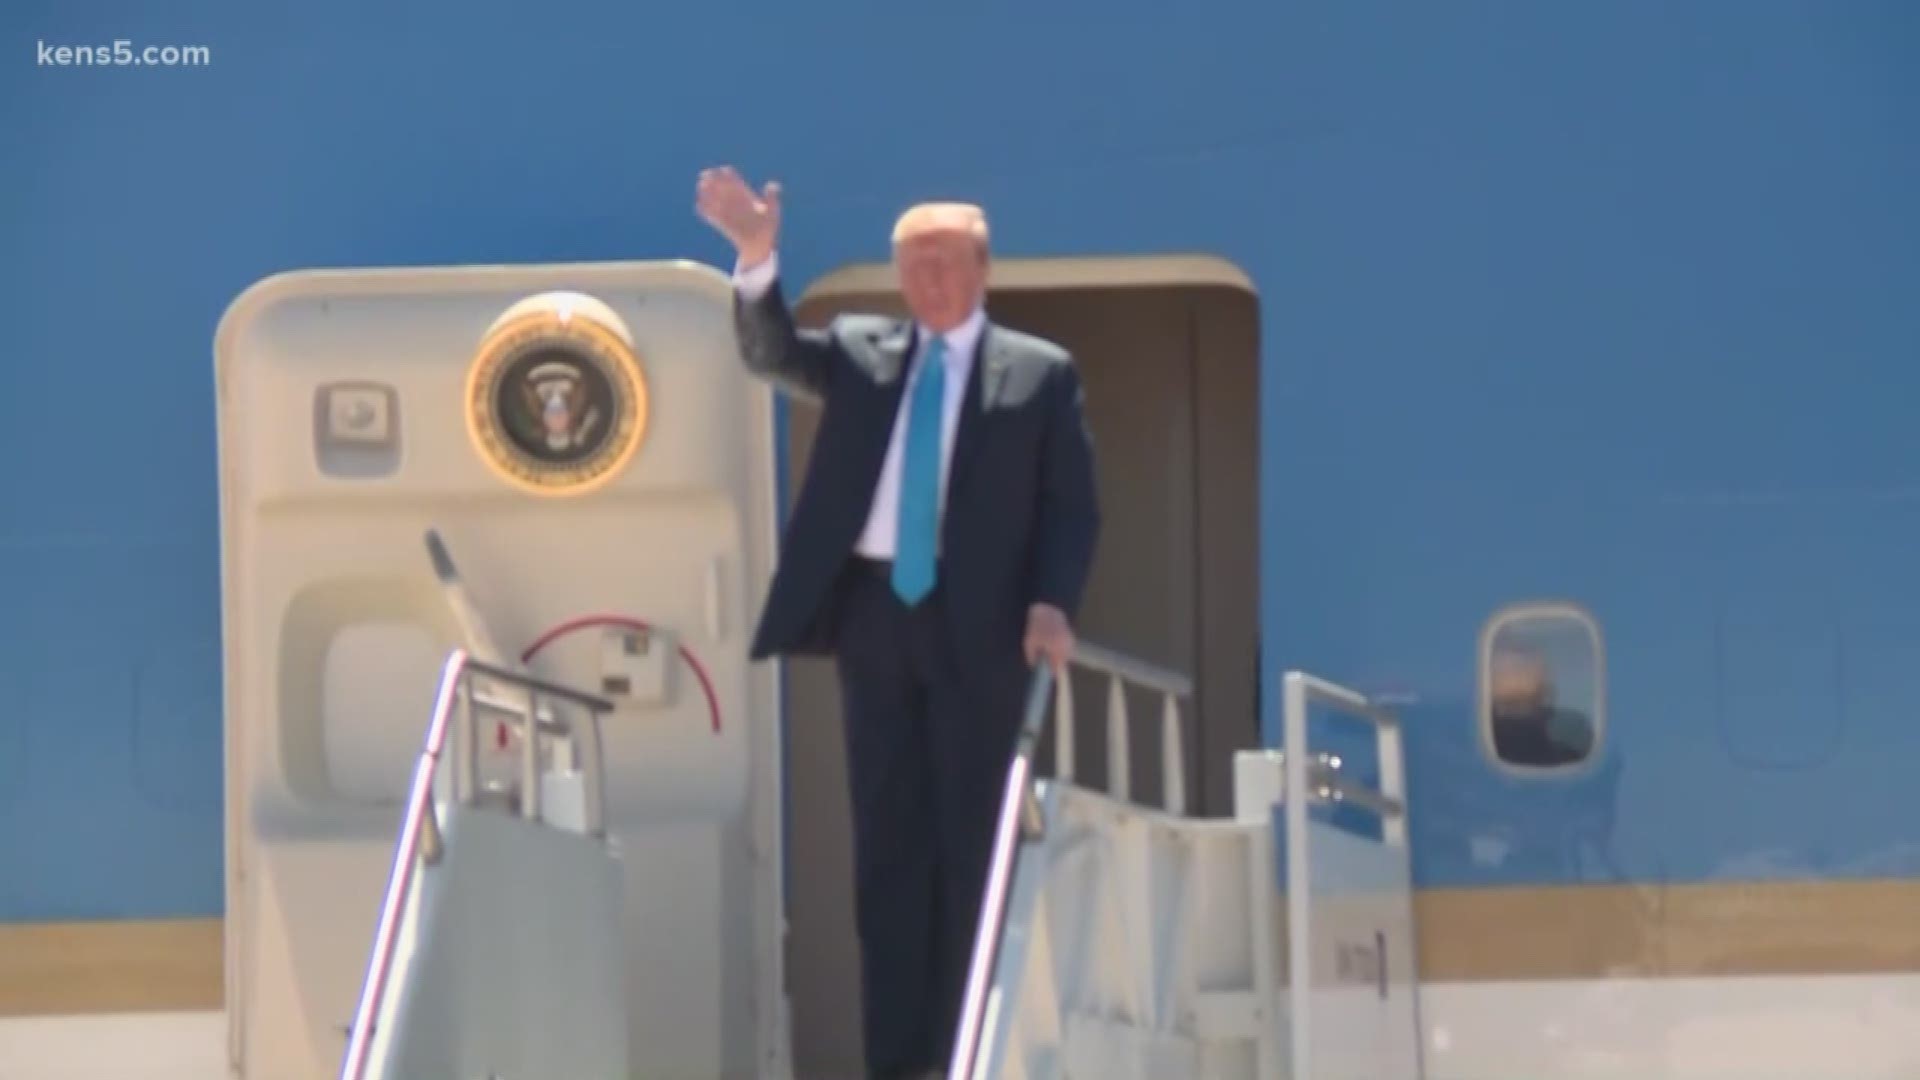 Air Force One touched down in the Alamo City just before noon today. President Trump is in town for a fundraising lunch. He is expected to hold a roundtable discussion on immigration prior to the luncheon.